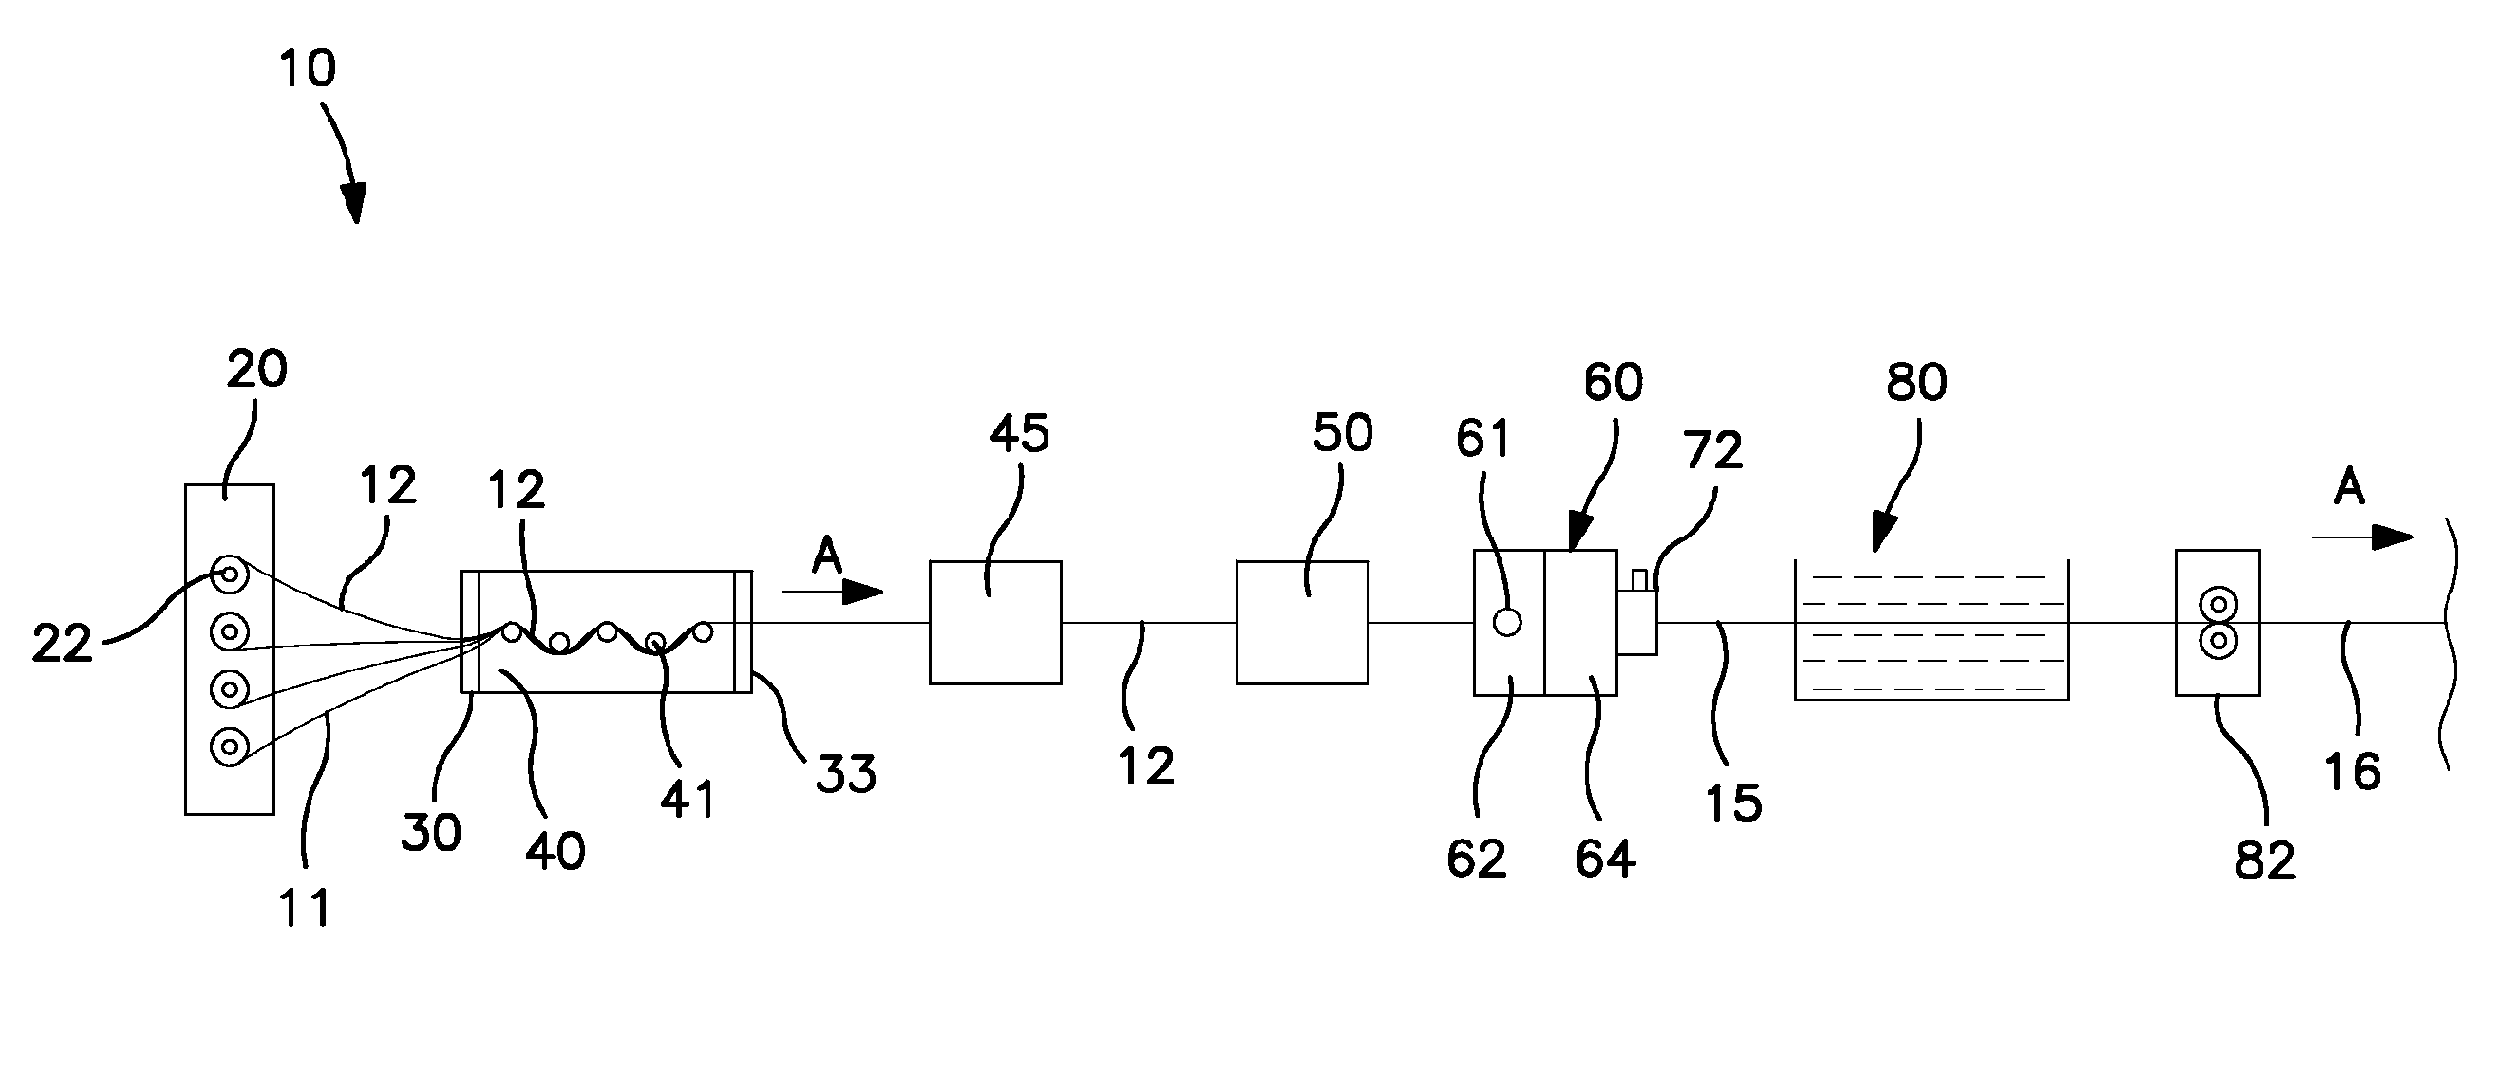 Method for Forming Reinfoced Pultruded Profiles